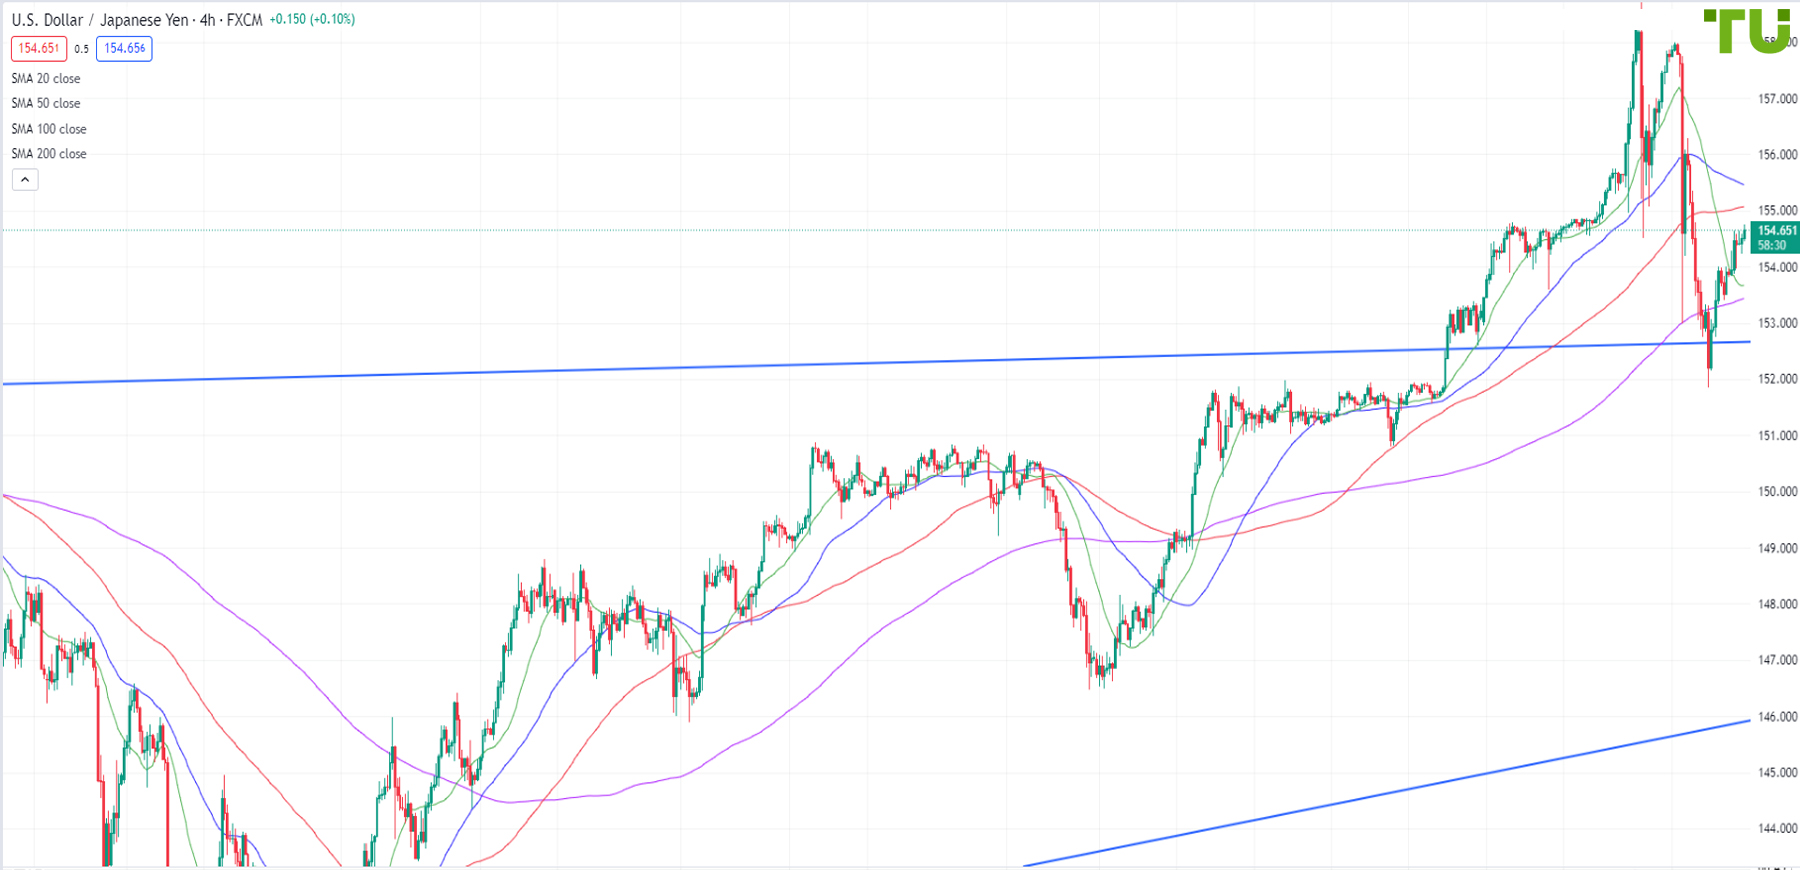 USD/JPY moves higher